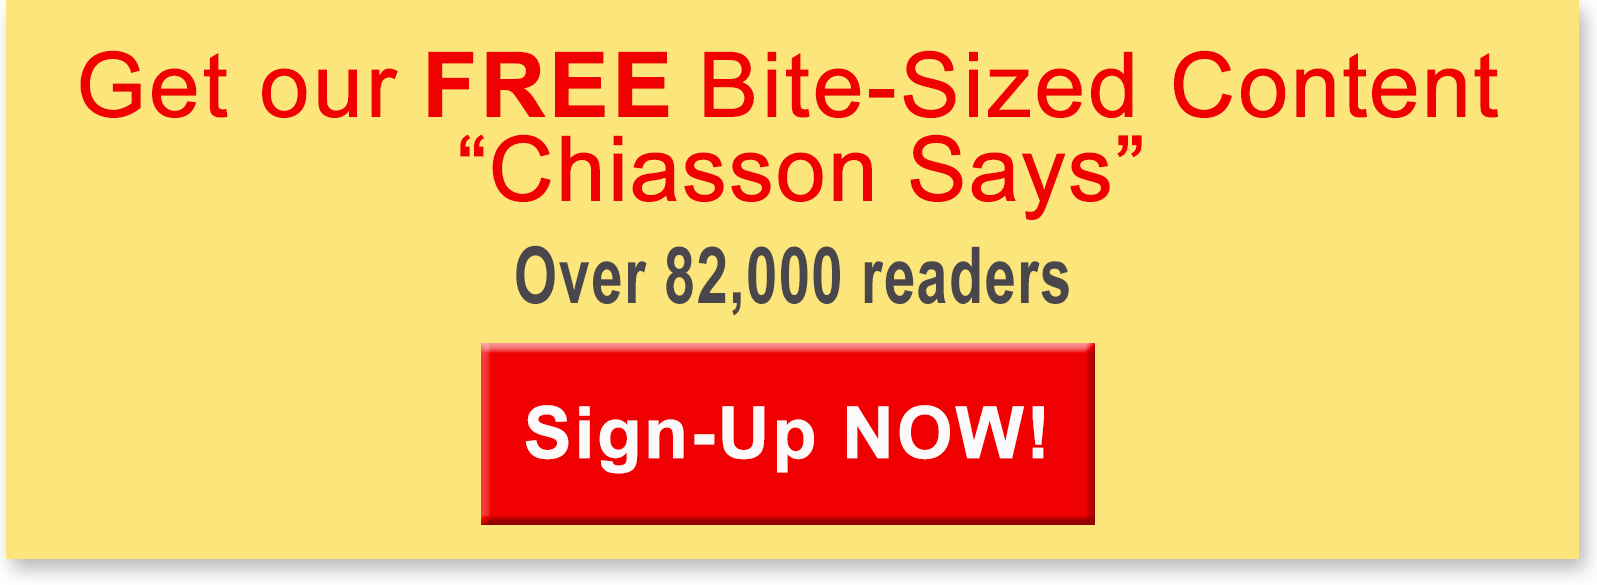 Free Newsletter - Chiasson Says - Sign-up Now!